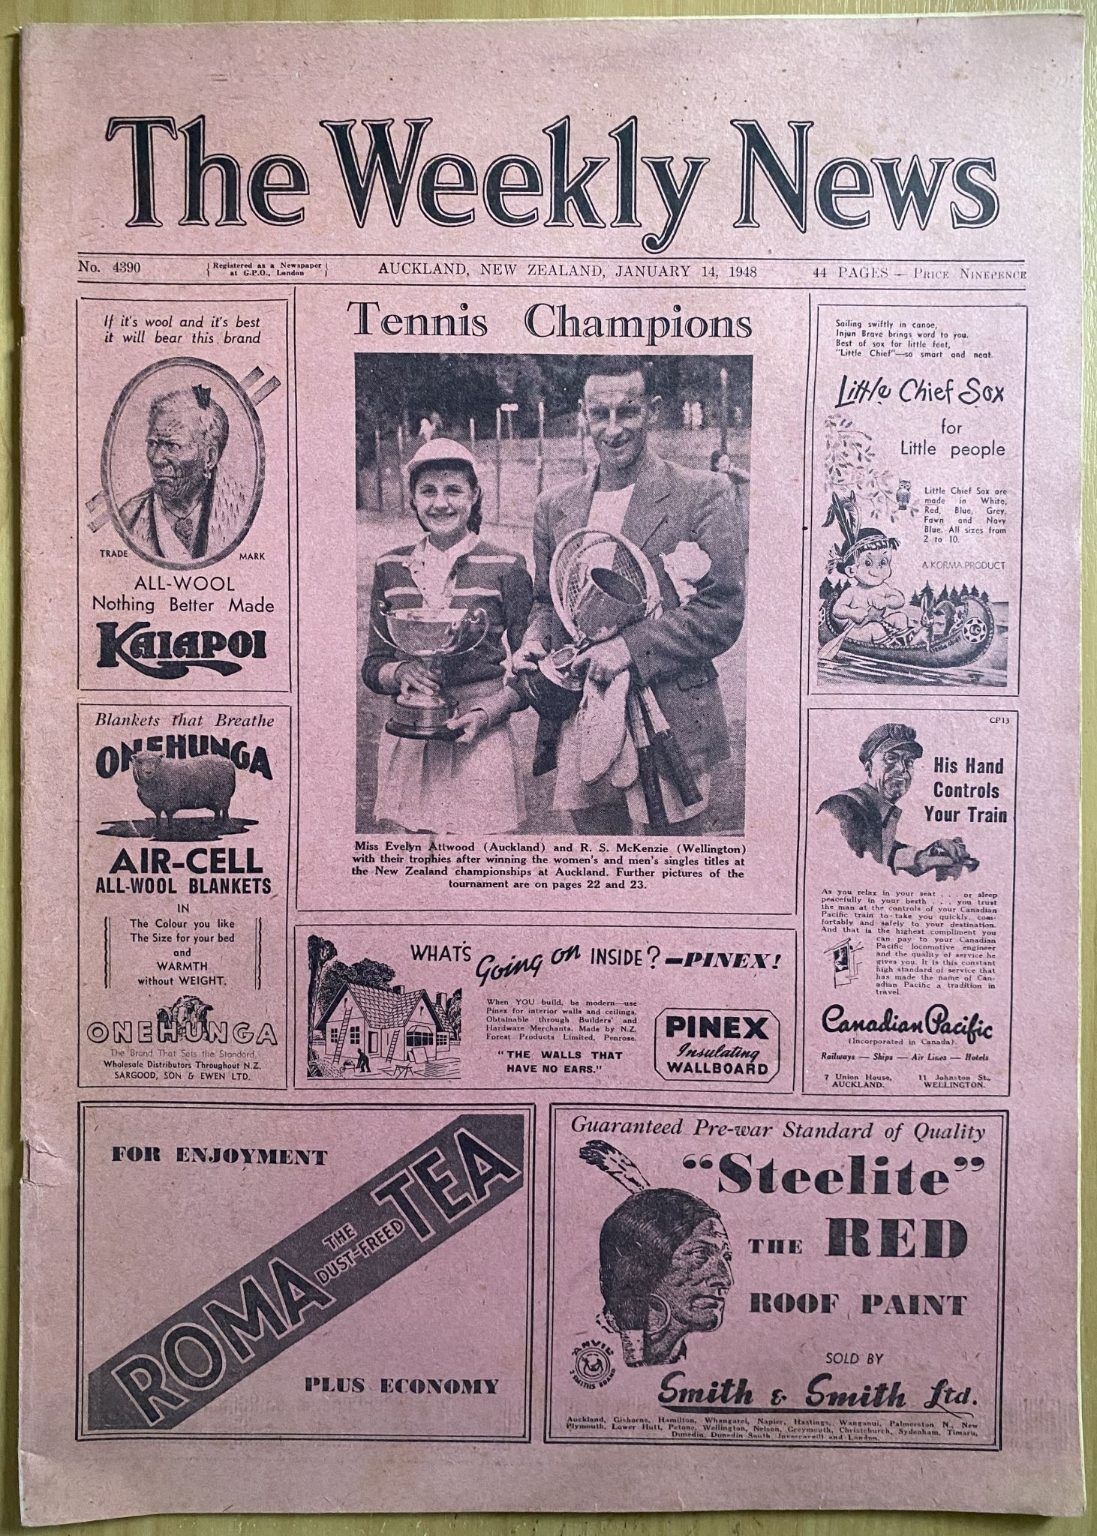 OLD NEWSPAPER: The Weekly News - No. 4390, 14 January 1948